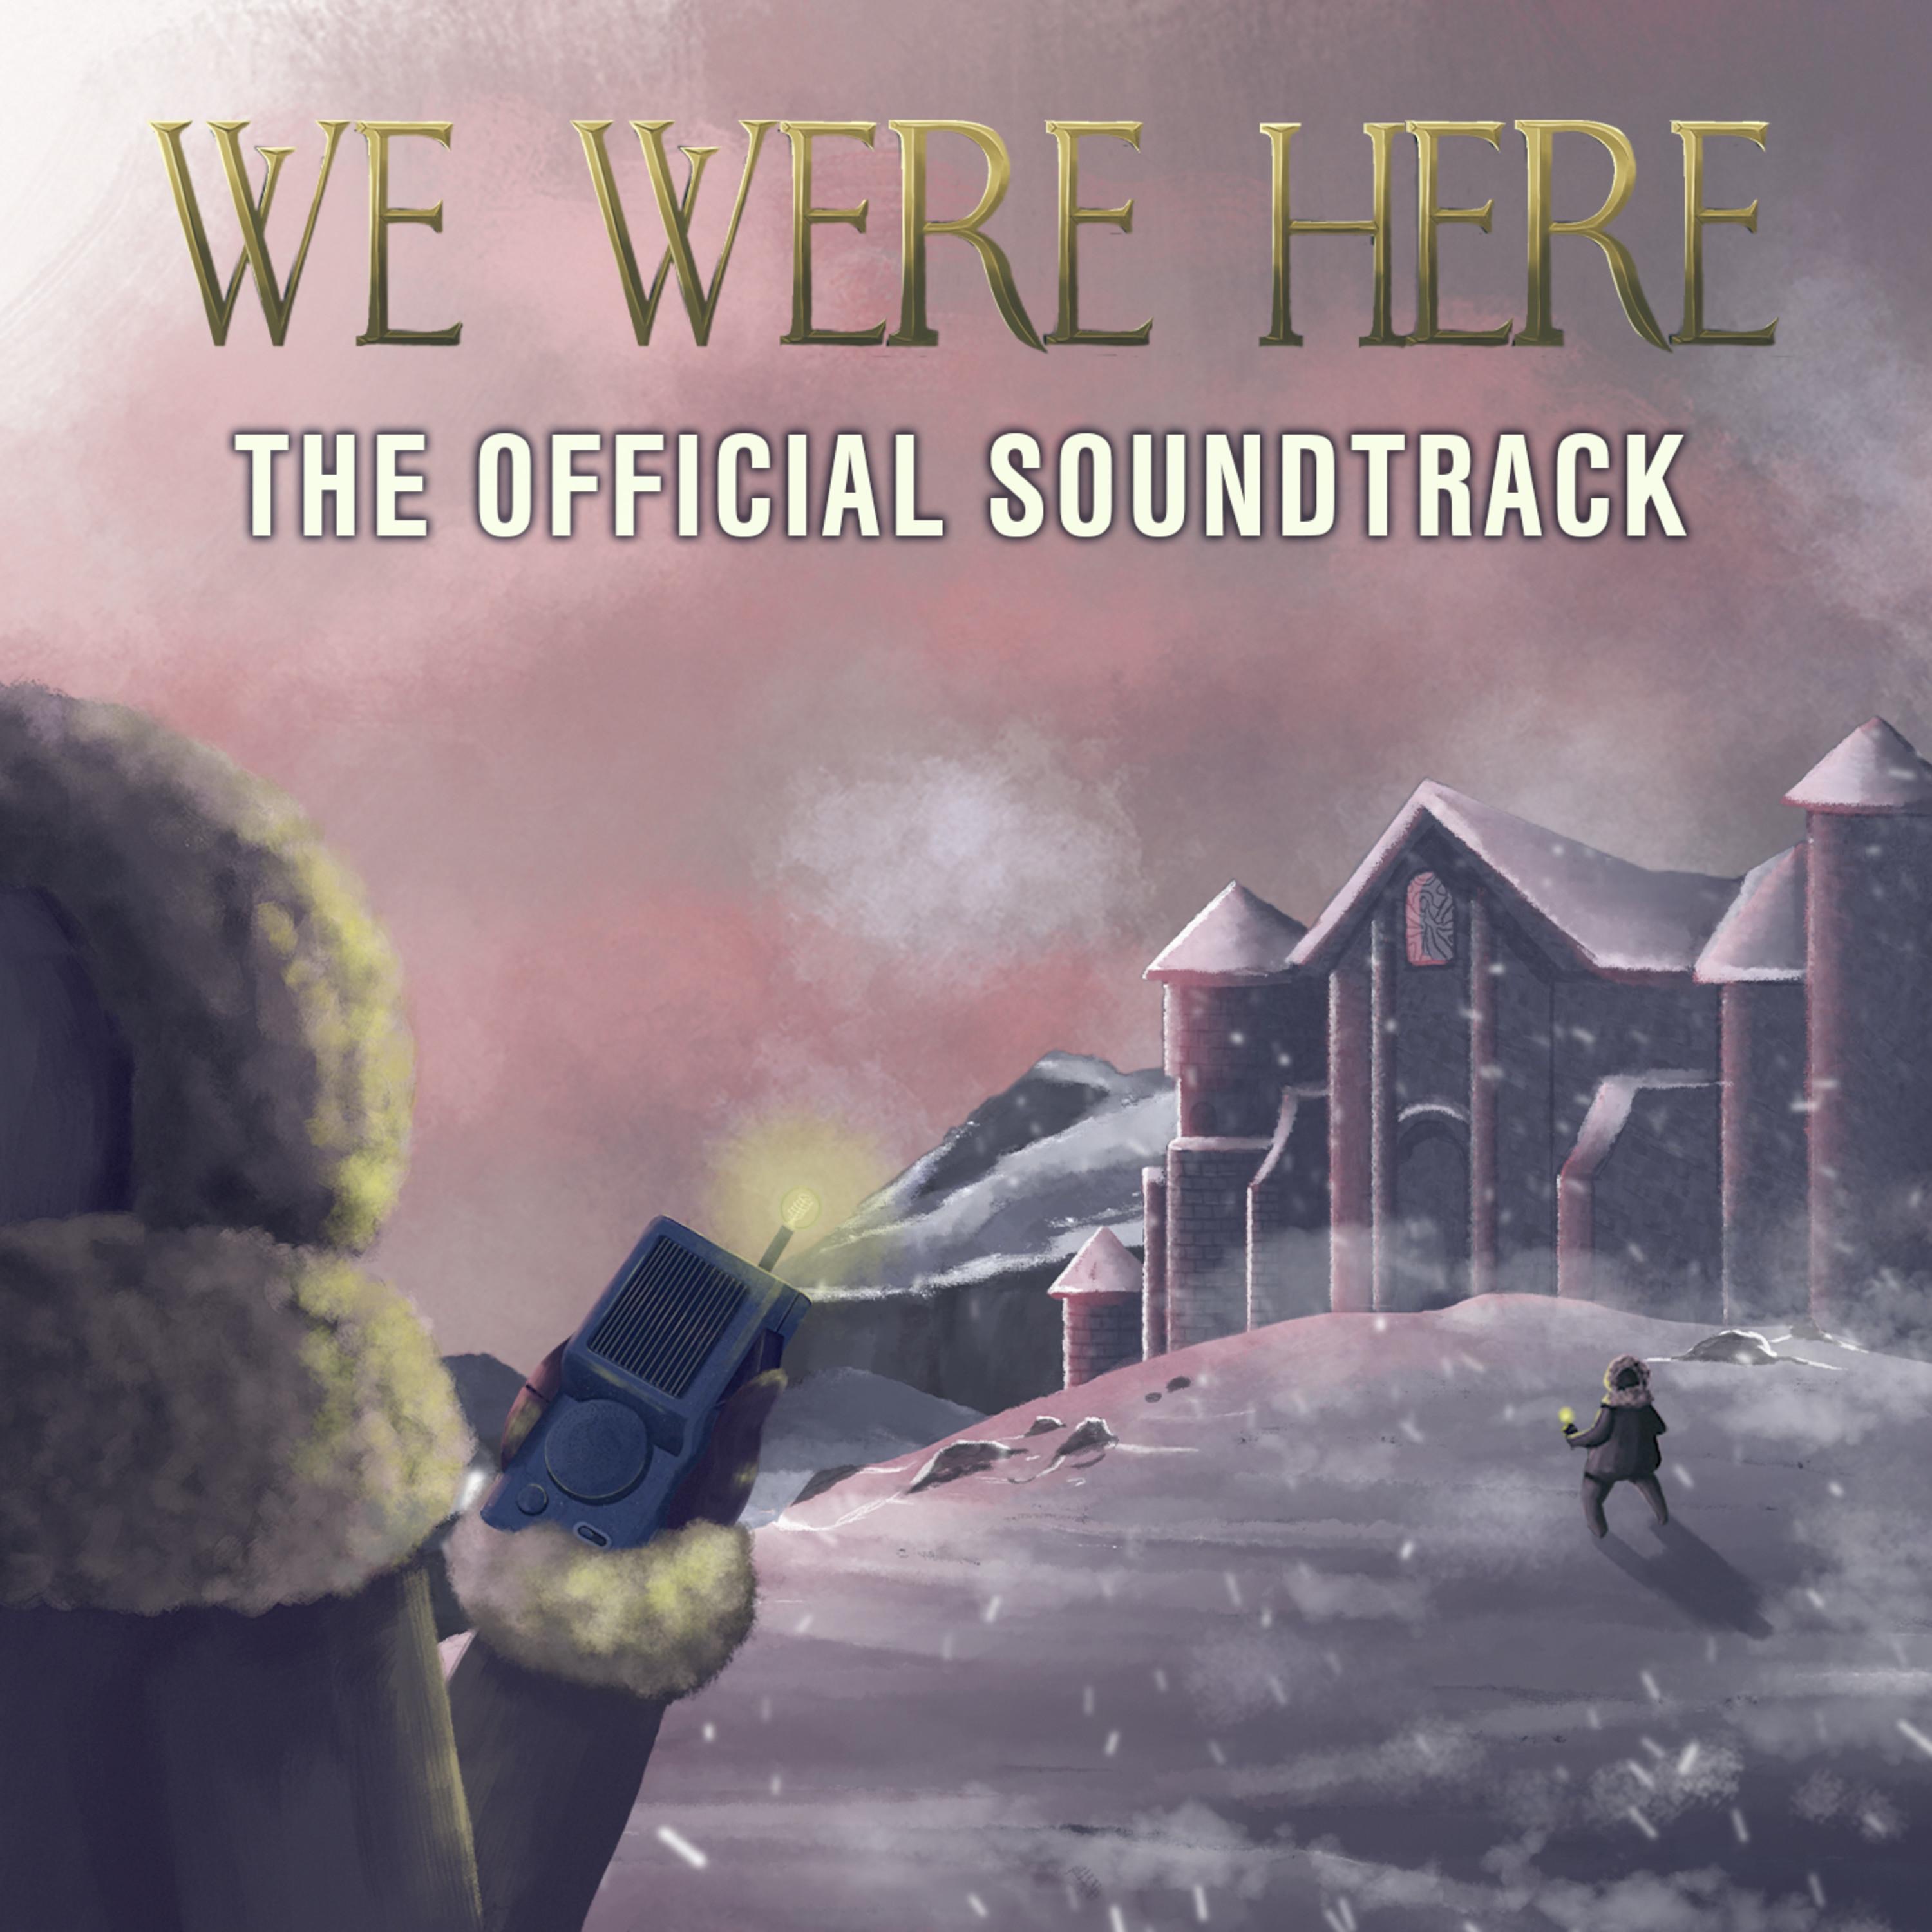 Here отзывы. We were here игра. We were here OST. We were here together снег. Игра we were here together.